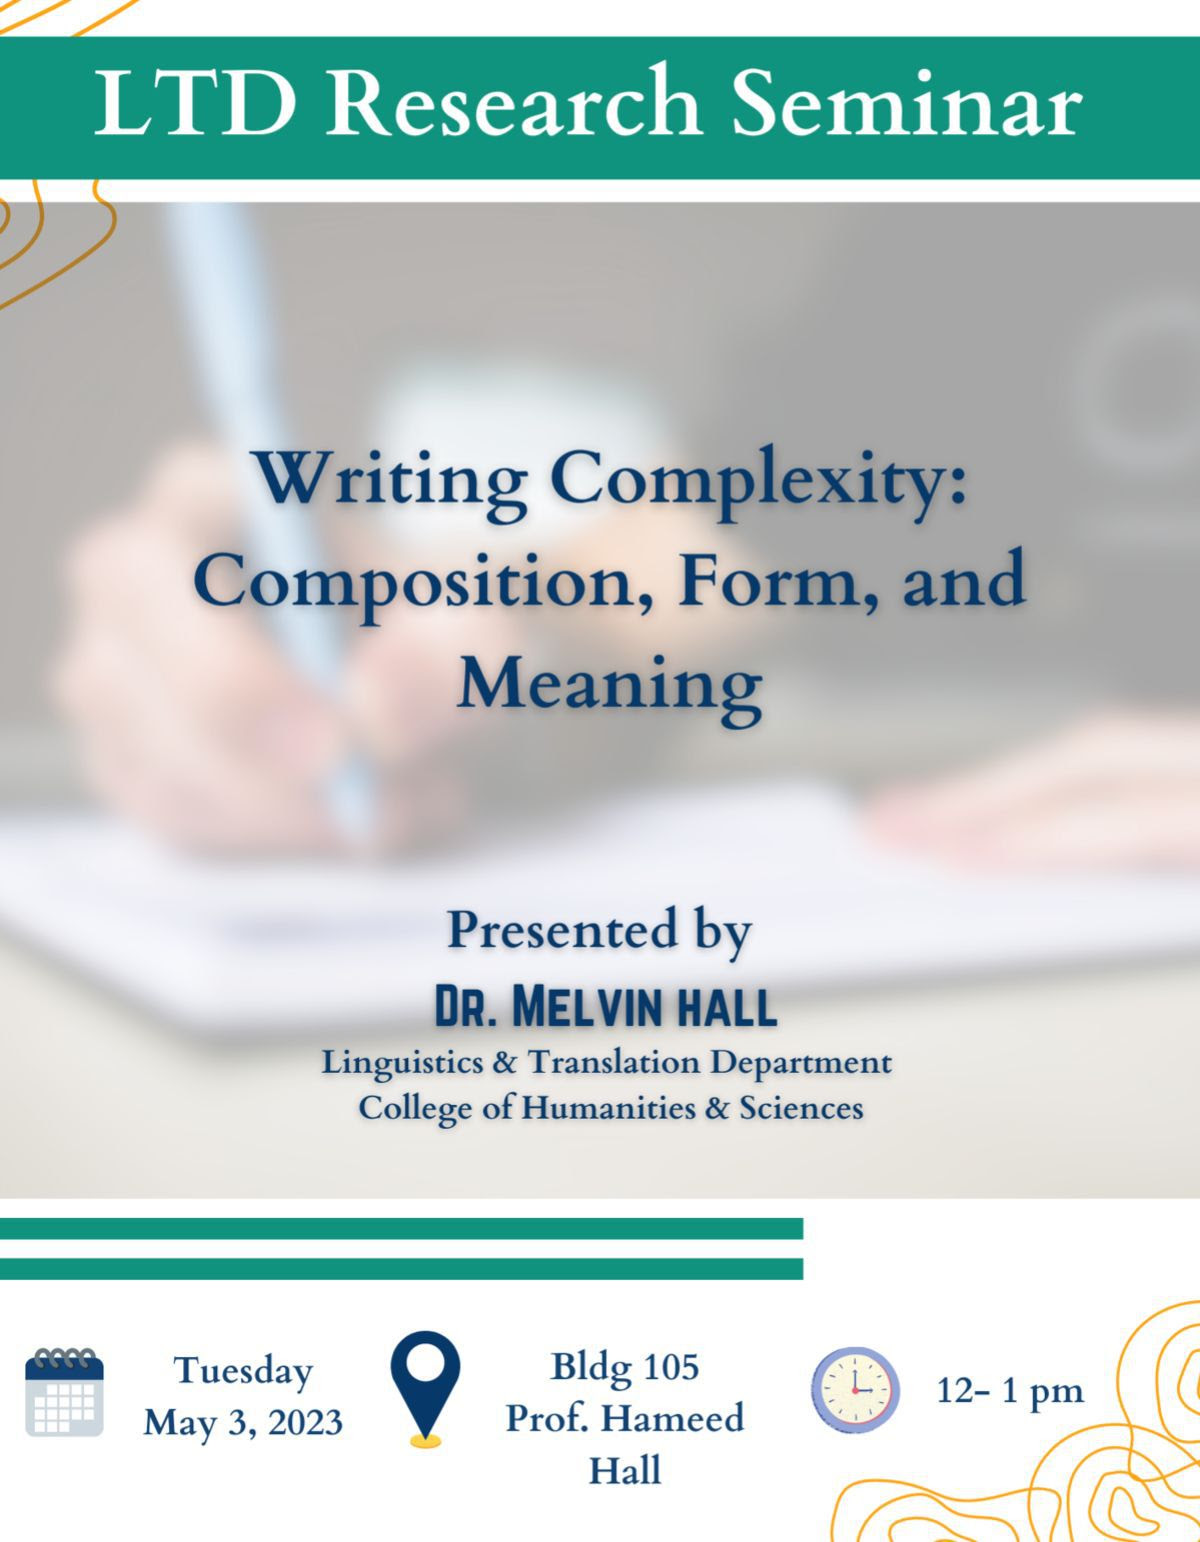 Writing Complexity: Composition, Form & Meaning (12-1, Bldg 105, Prof. Hameed Hall)